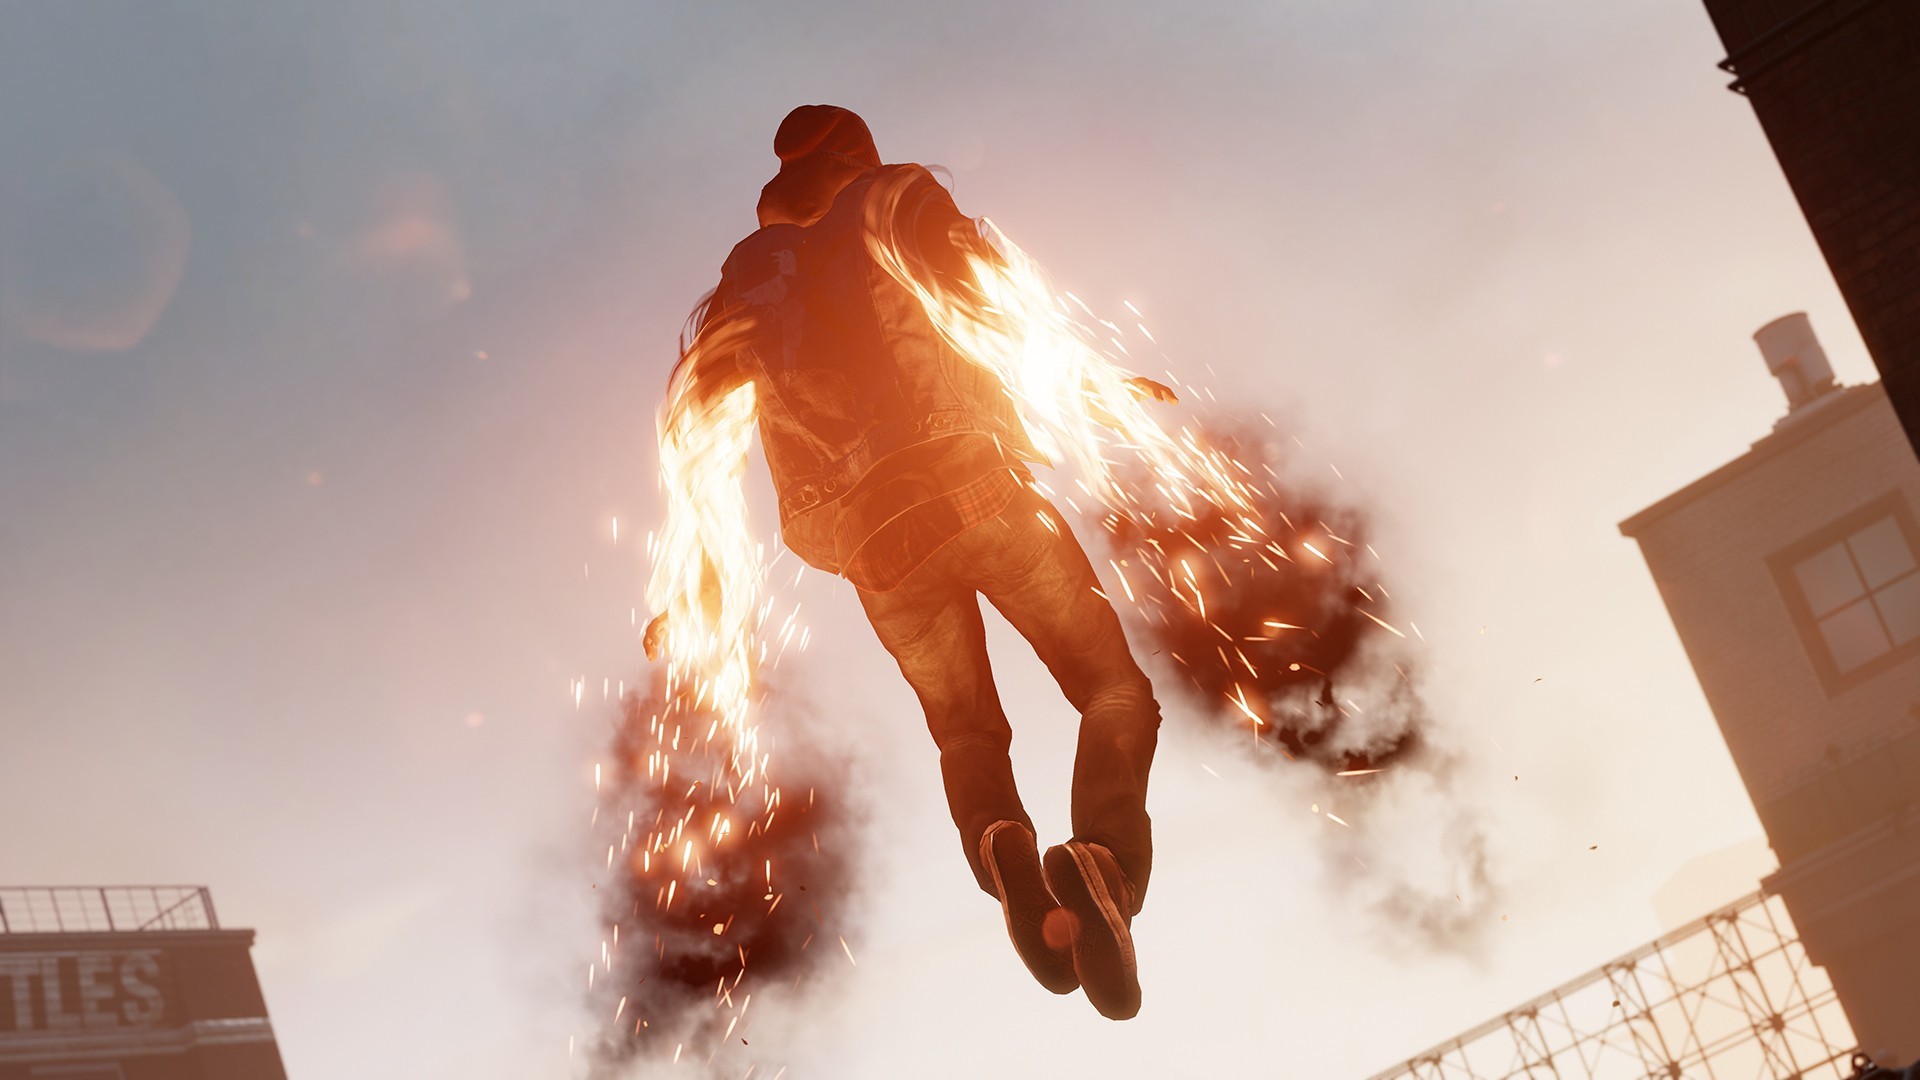 General 1920x1080 PC gaming Infamous: Second Son video games